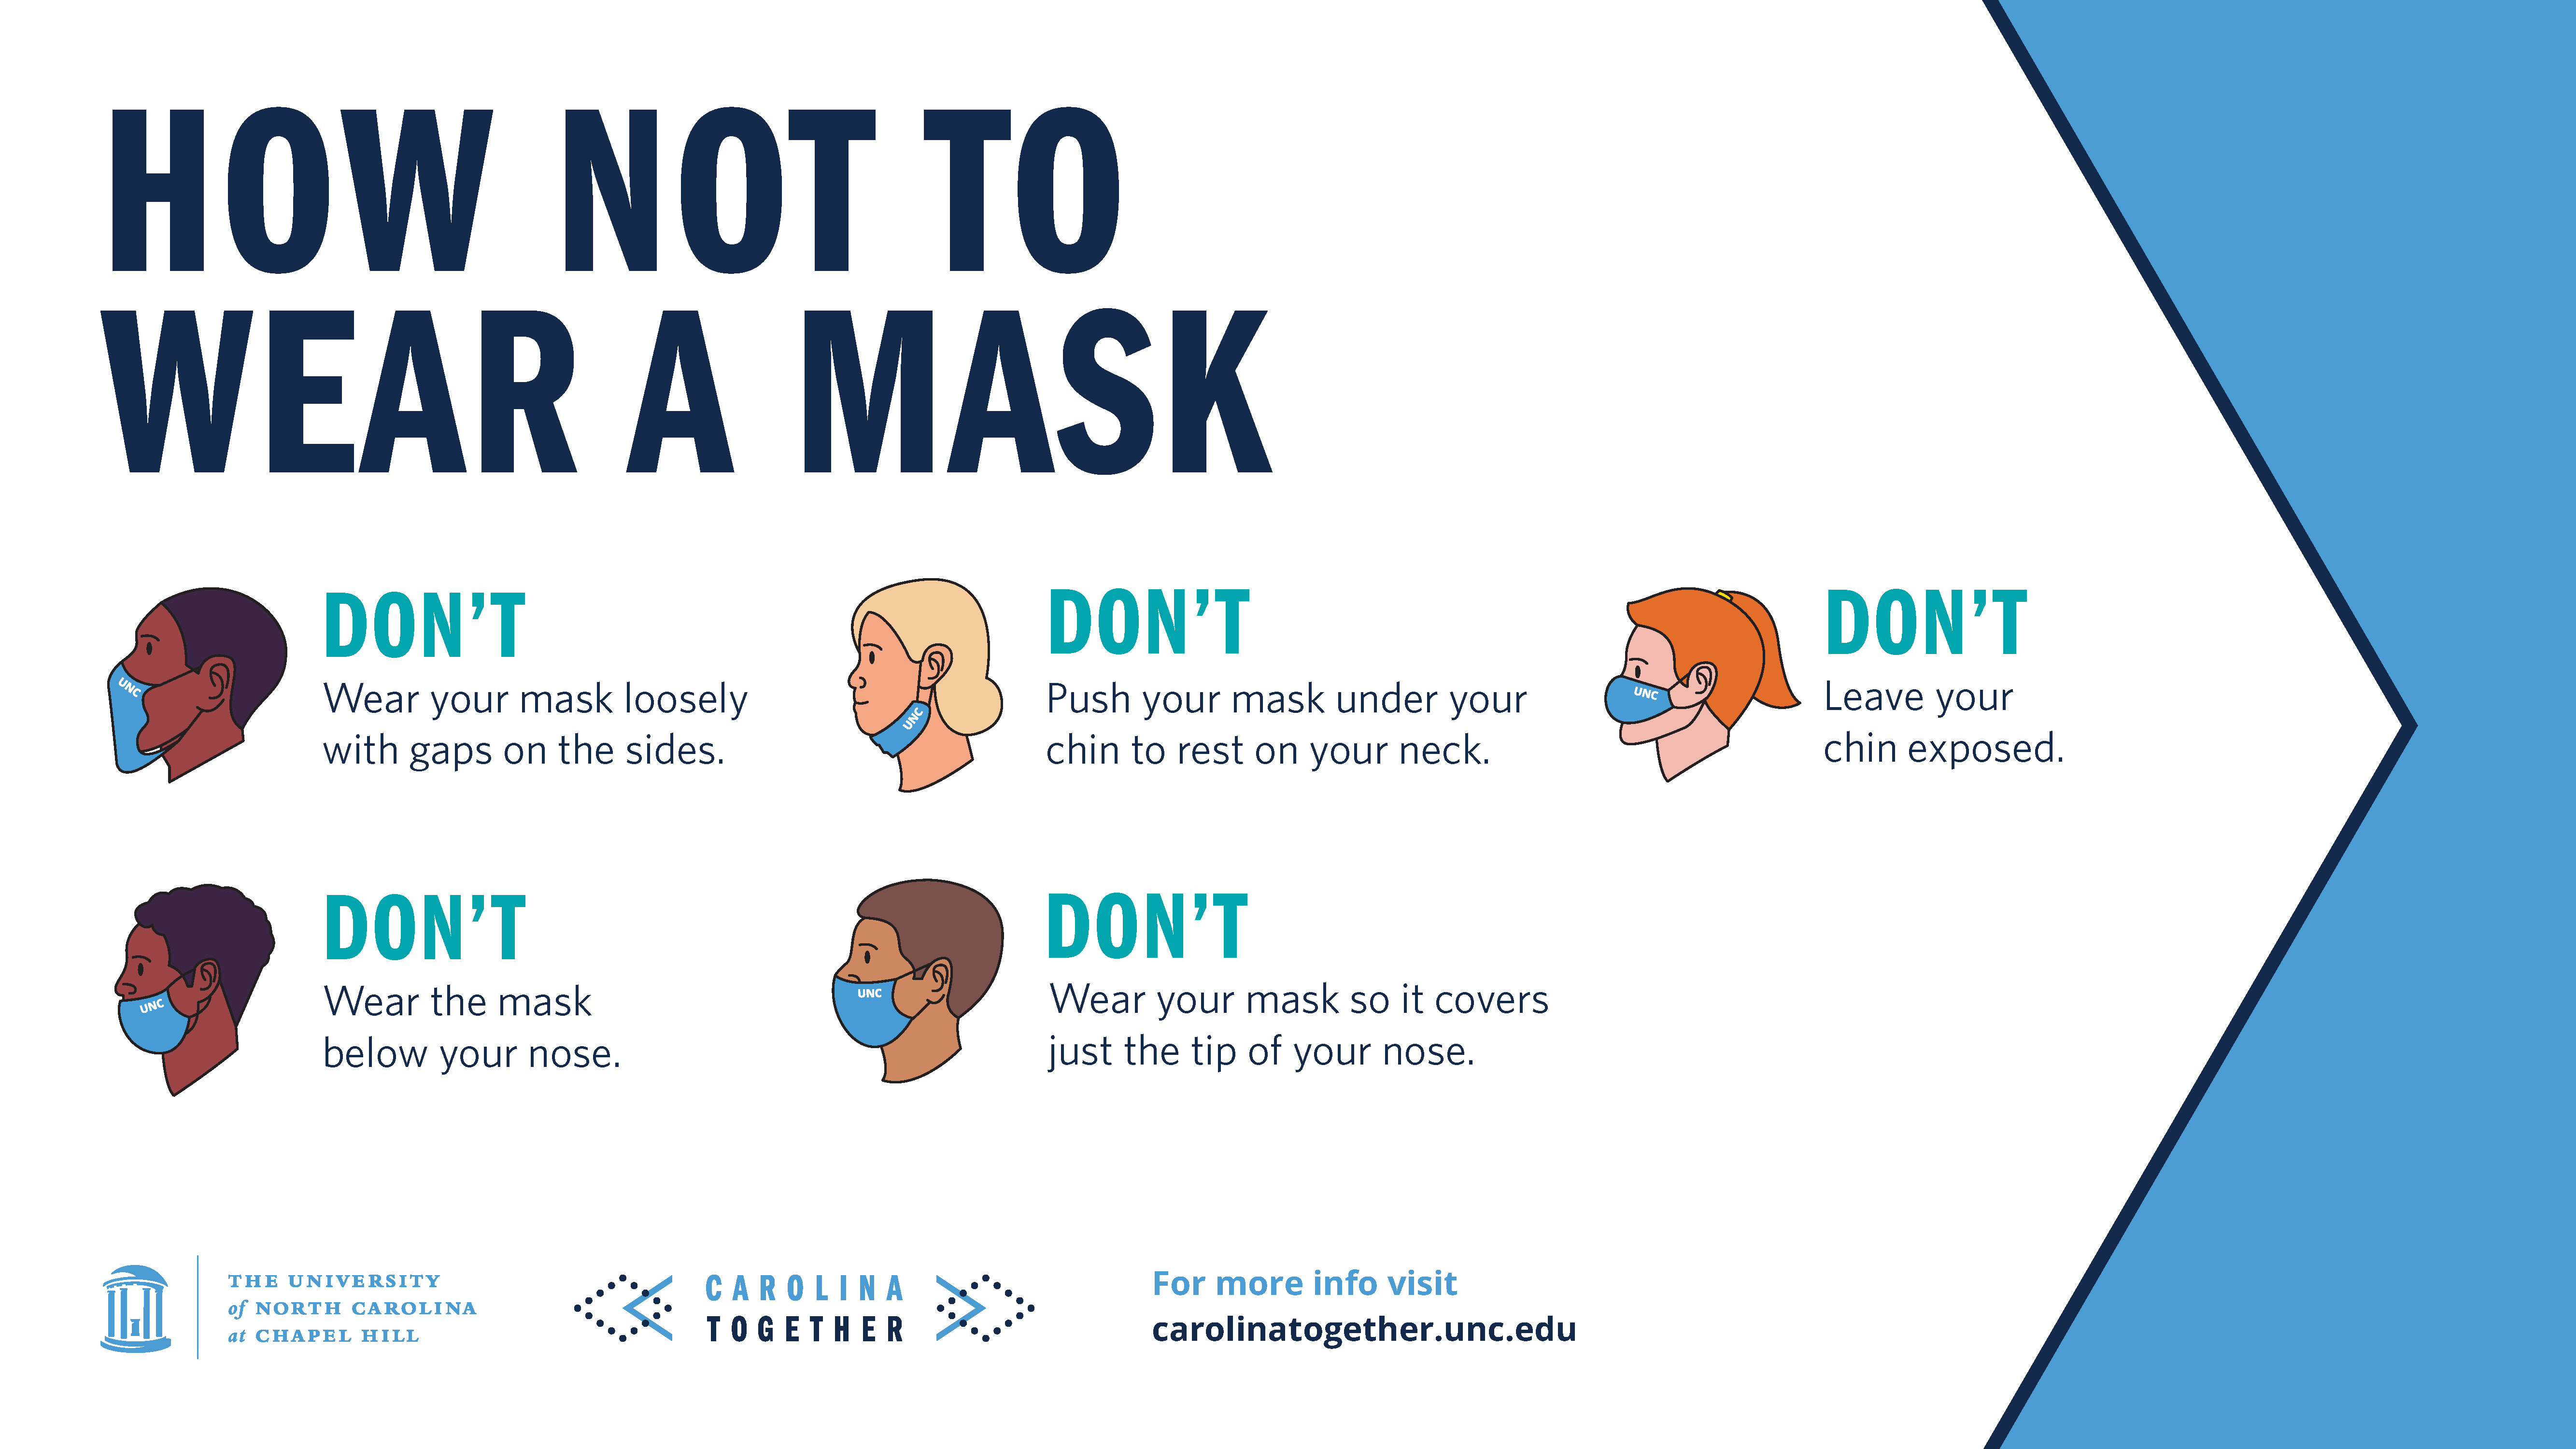 How not to wear a mask with icons